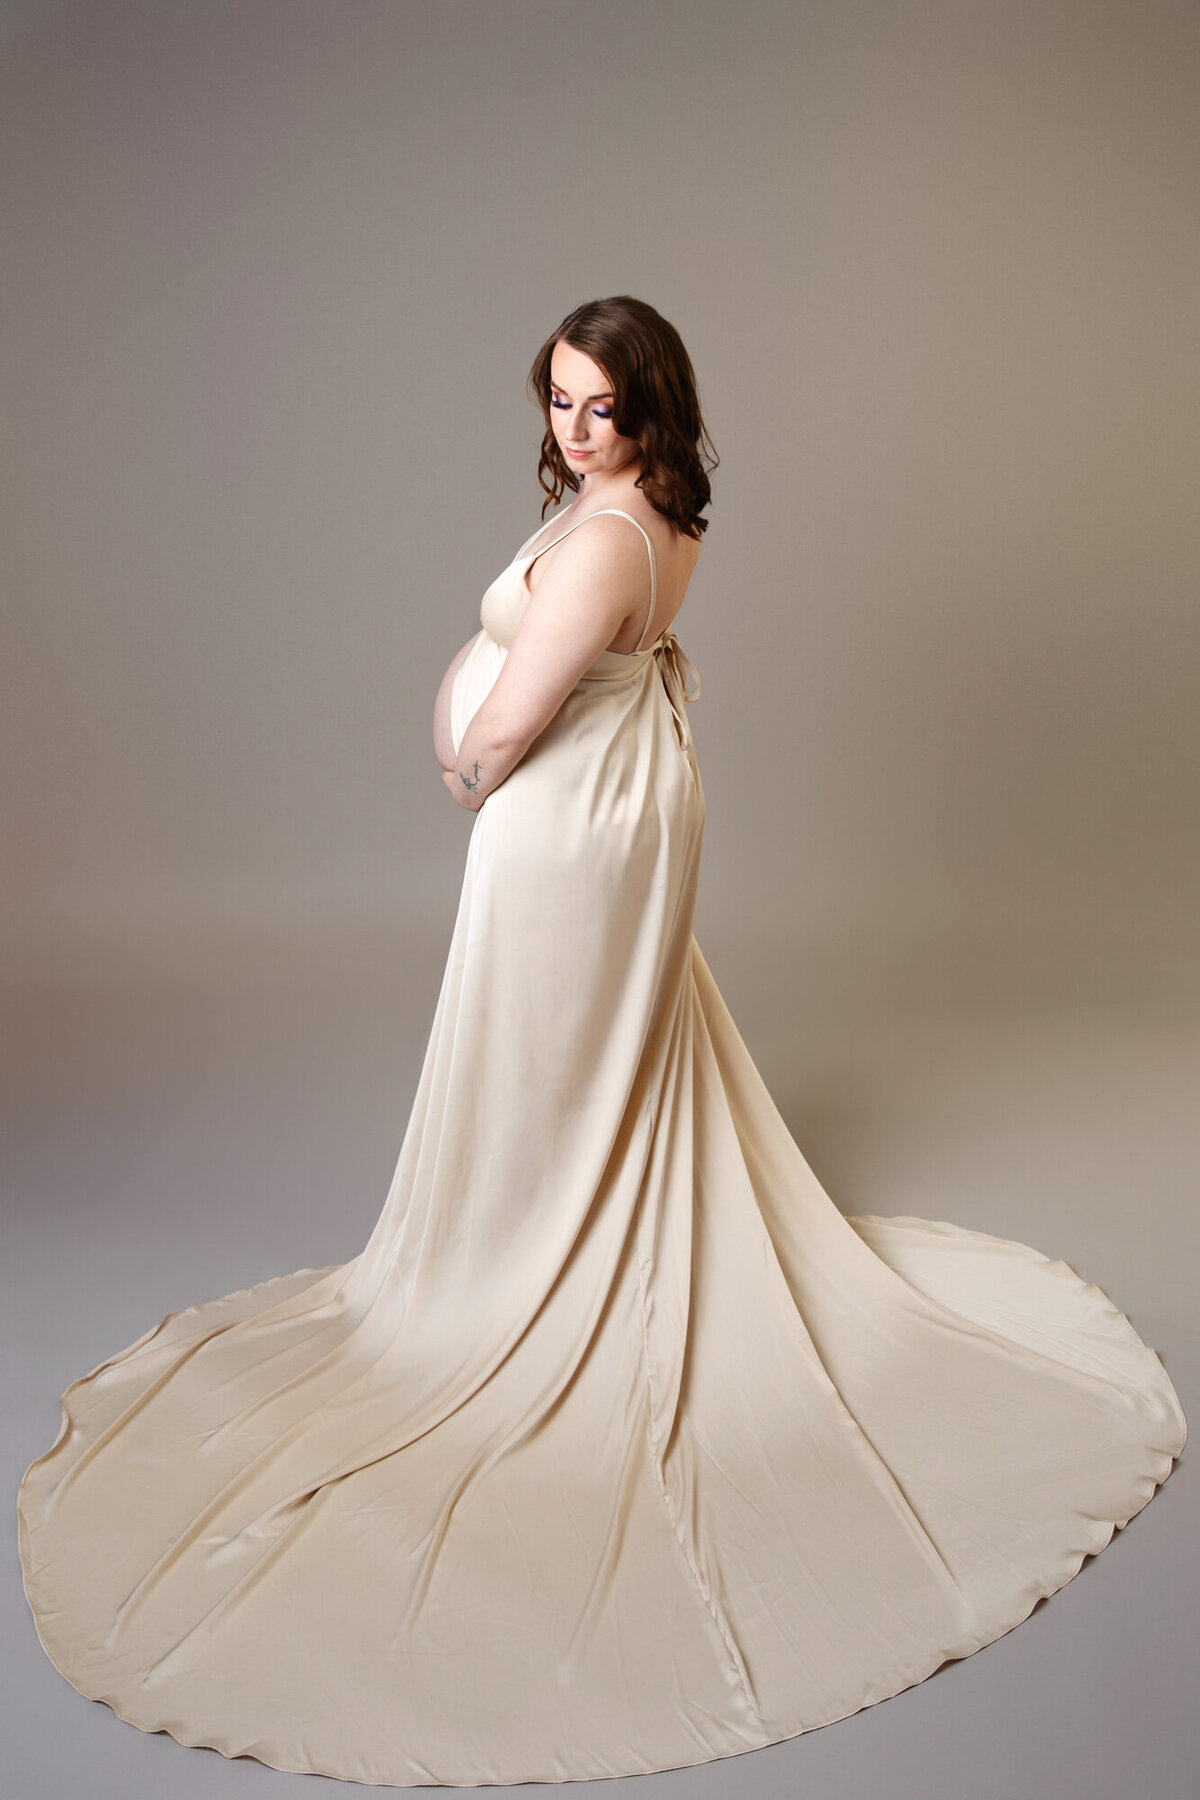 Pregnant woman wearing a long gold gown looking back over her shoulder